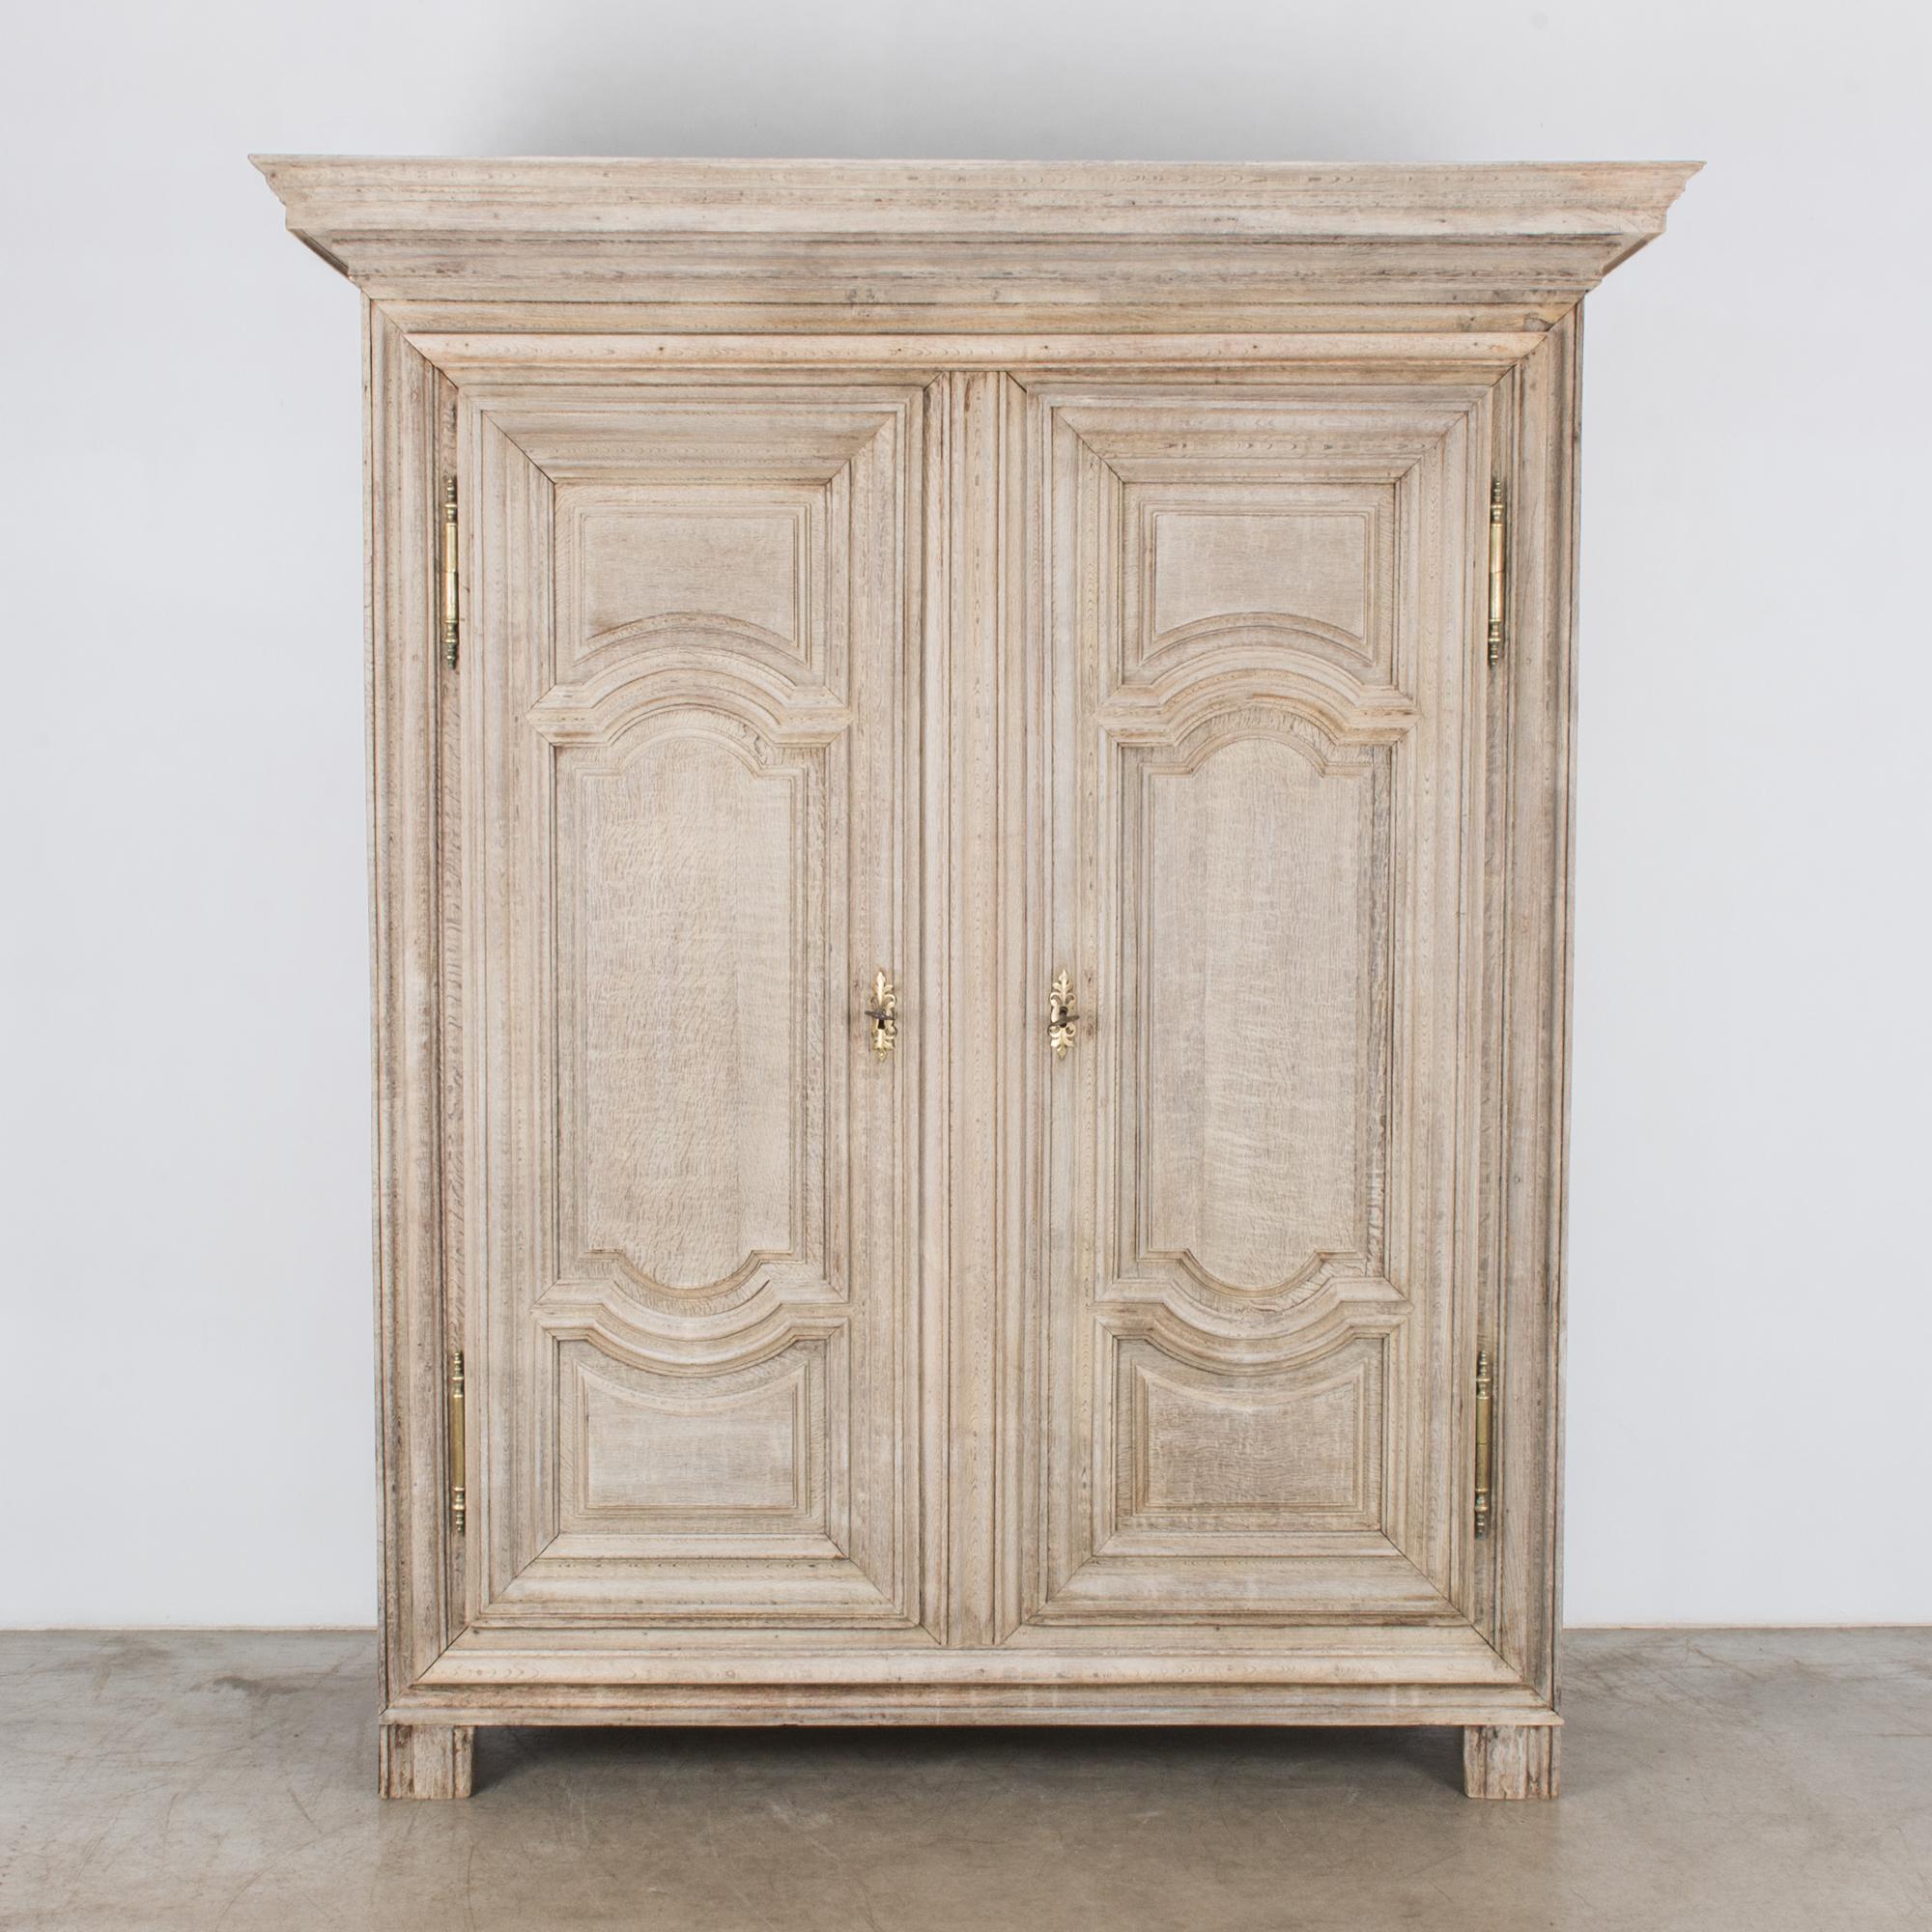 This bleached oak armoire was made in France, circa 1800. The two doors, each with its own key, open to reveal the generous storage space with three shelves. Elevated slightly on rectangular posts, this cabinet features decorative hinges and elegant